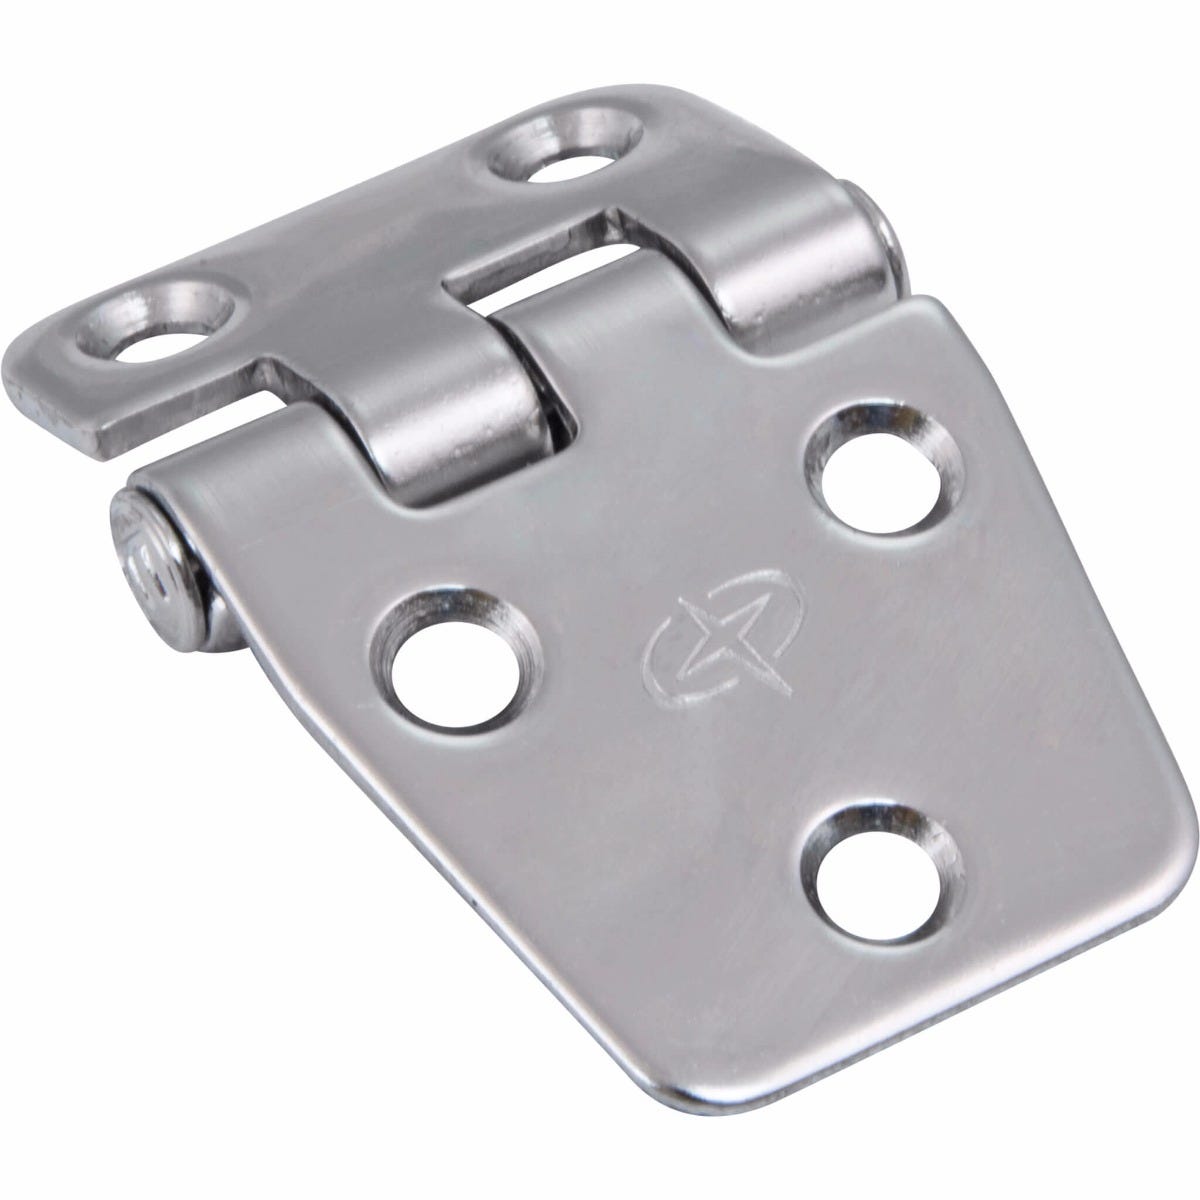 76mm x 76mm CQUIP 10-46785A Stainless Steel Butt Hinge 